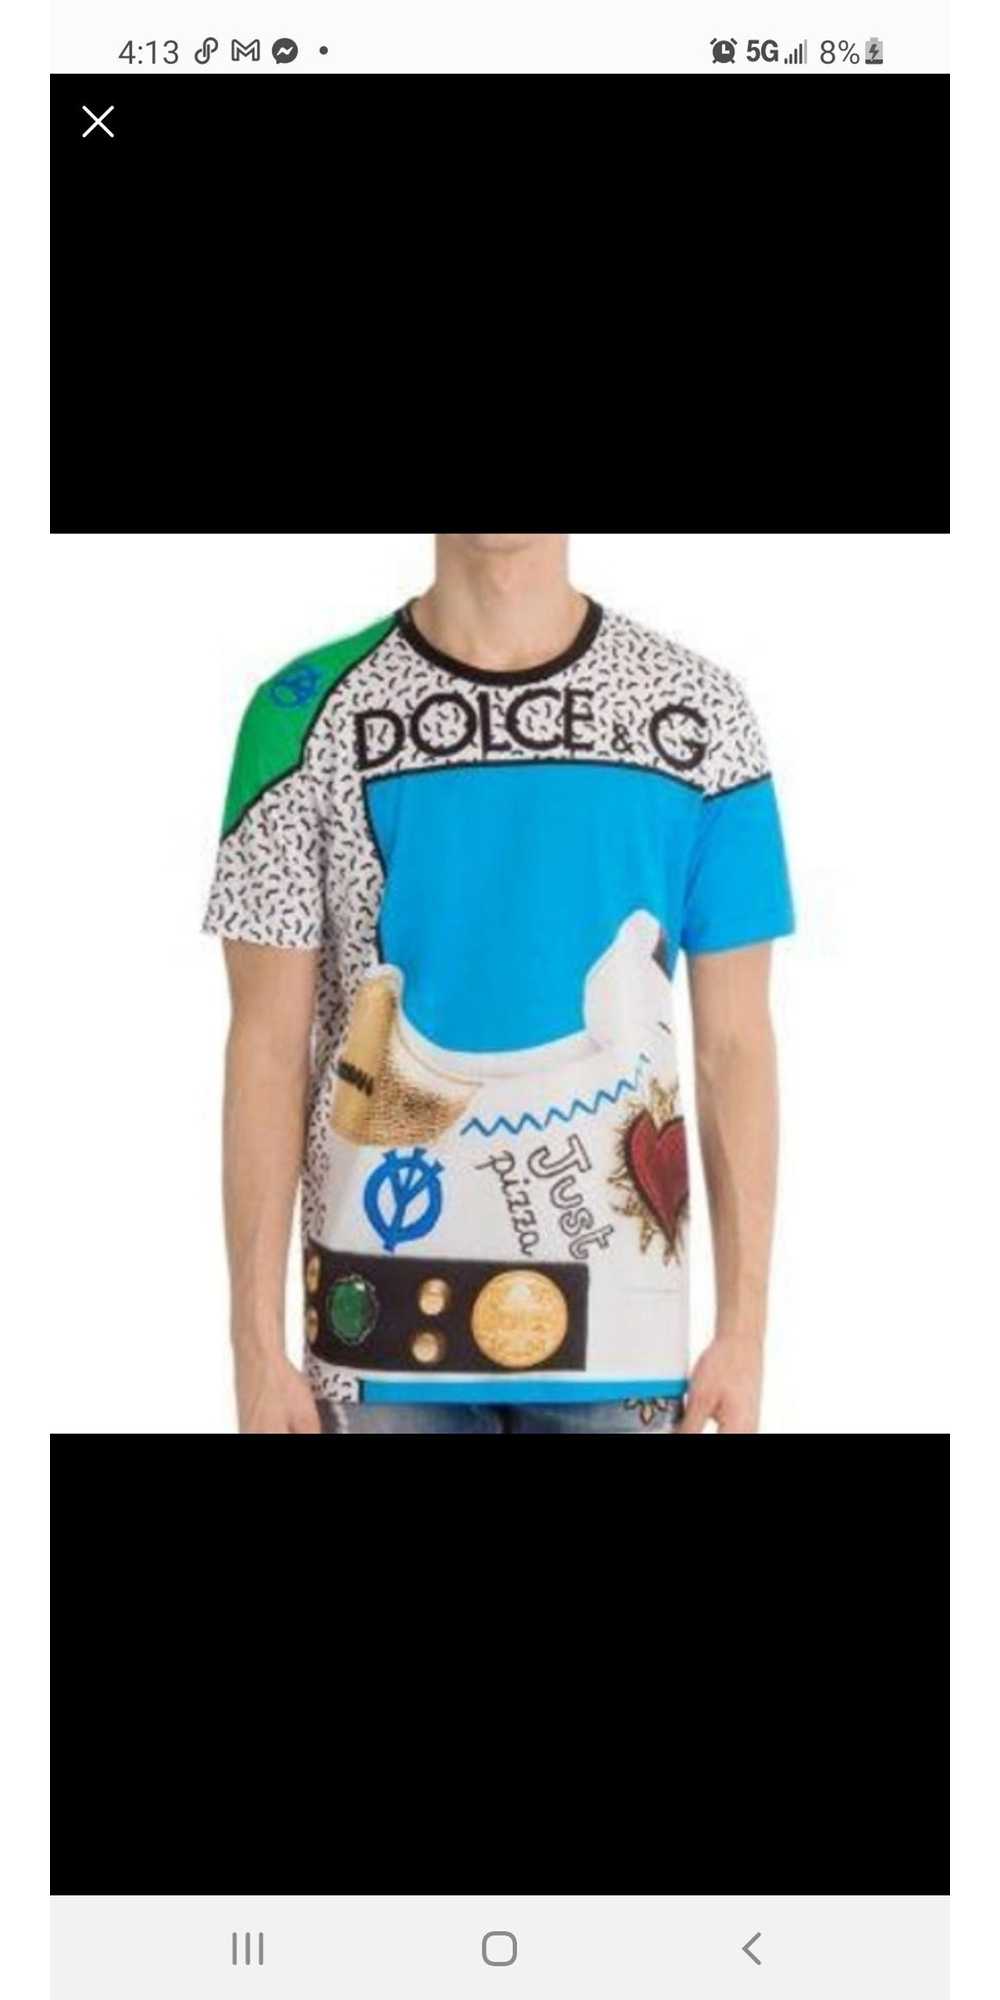 Dolce & Gabbana Just Pizza Tee Shirt in Light Blue - image 9